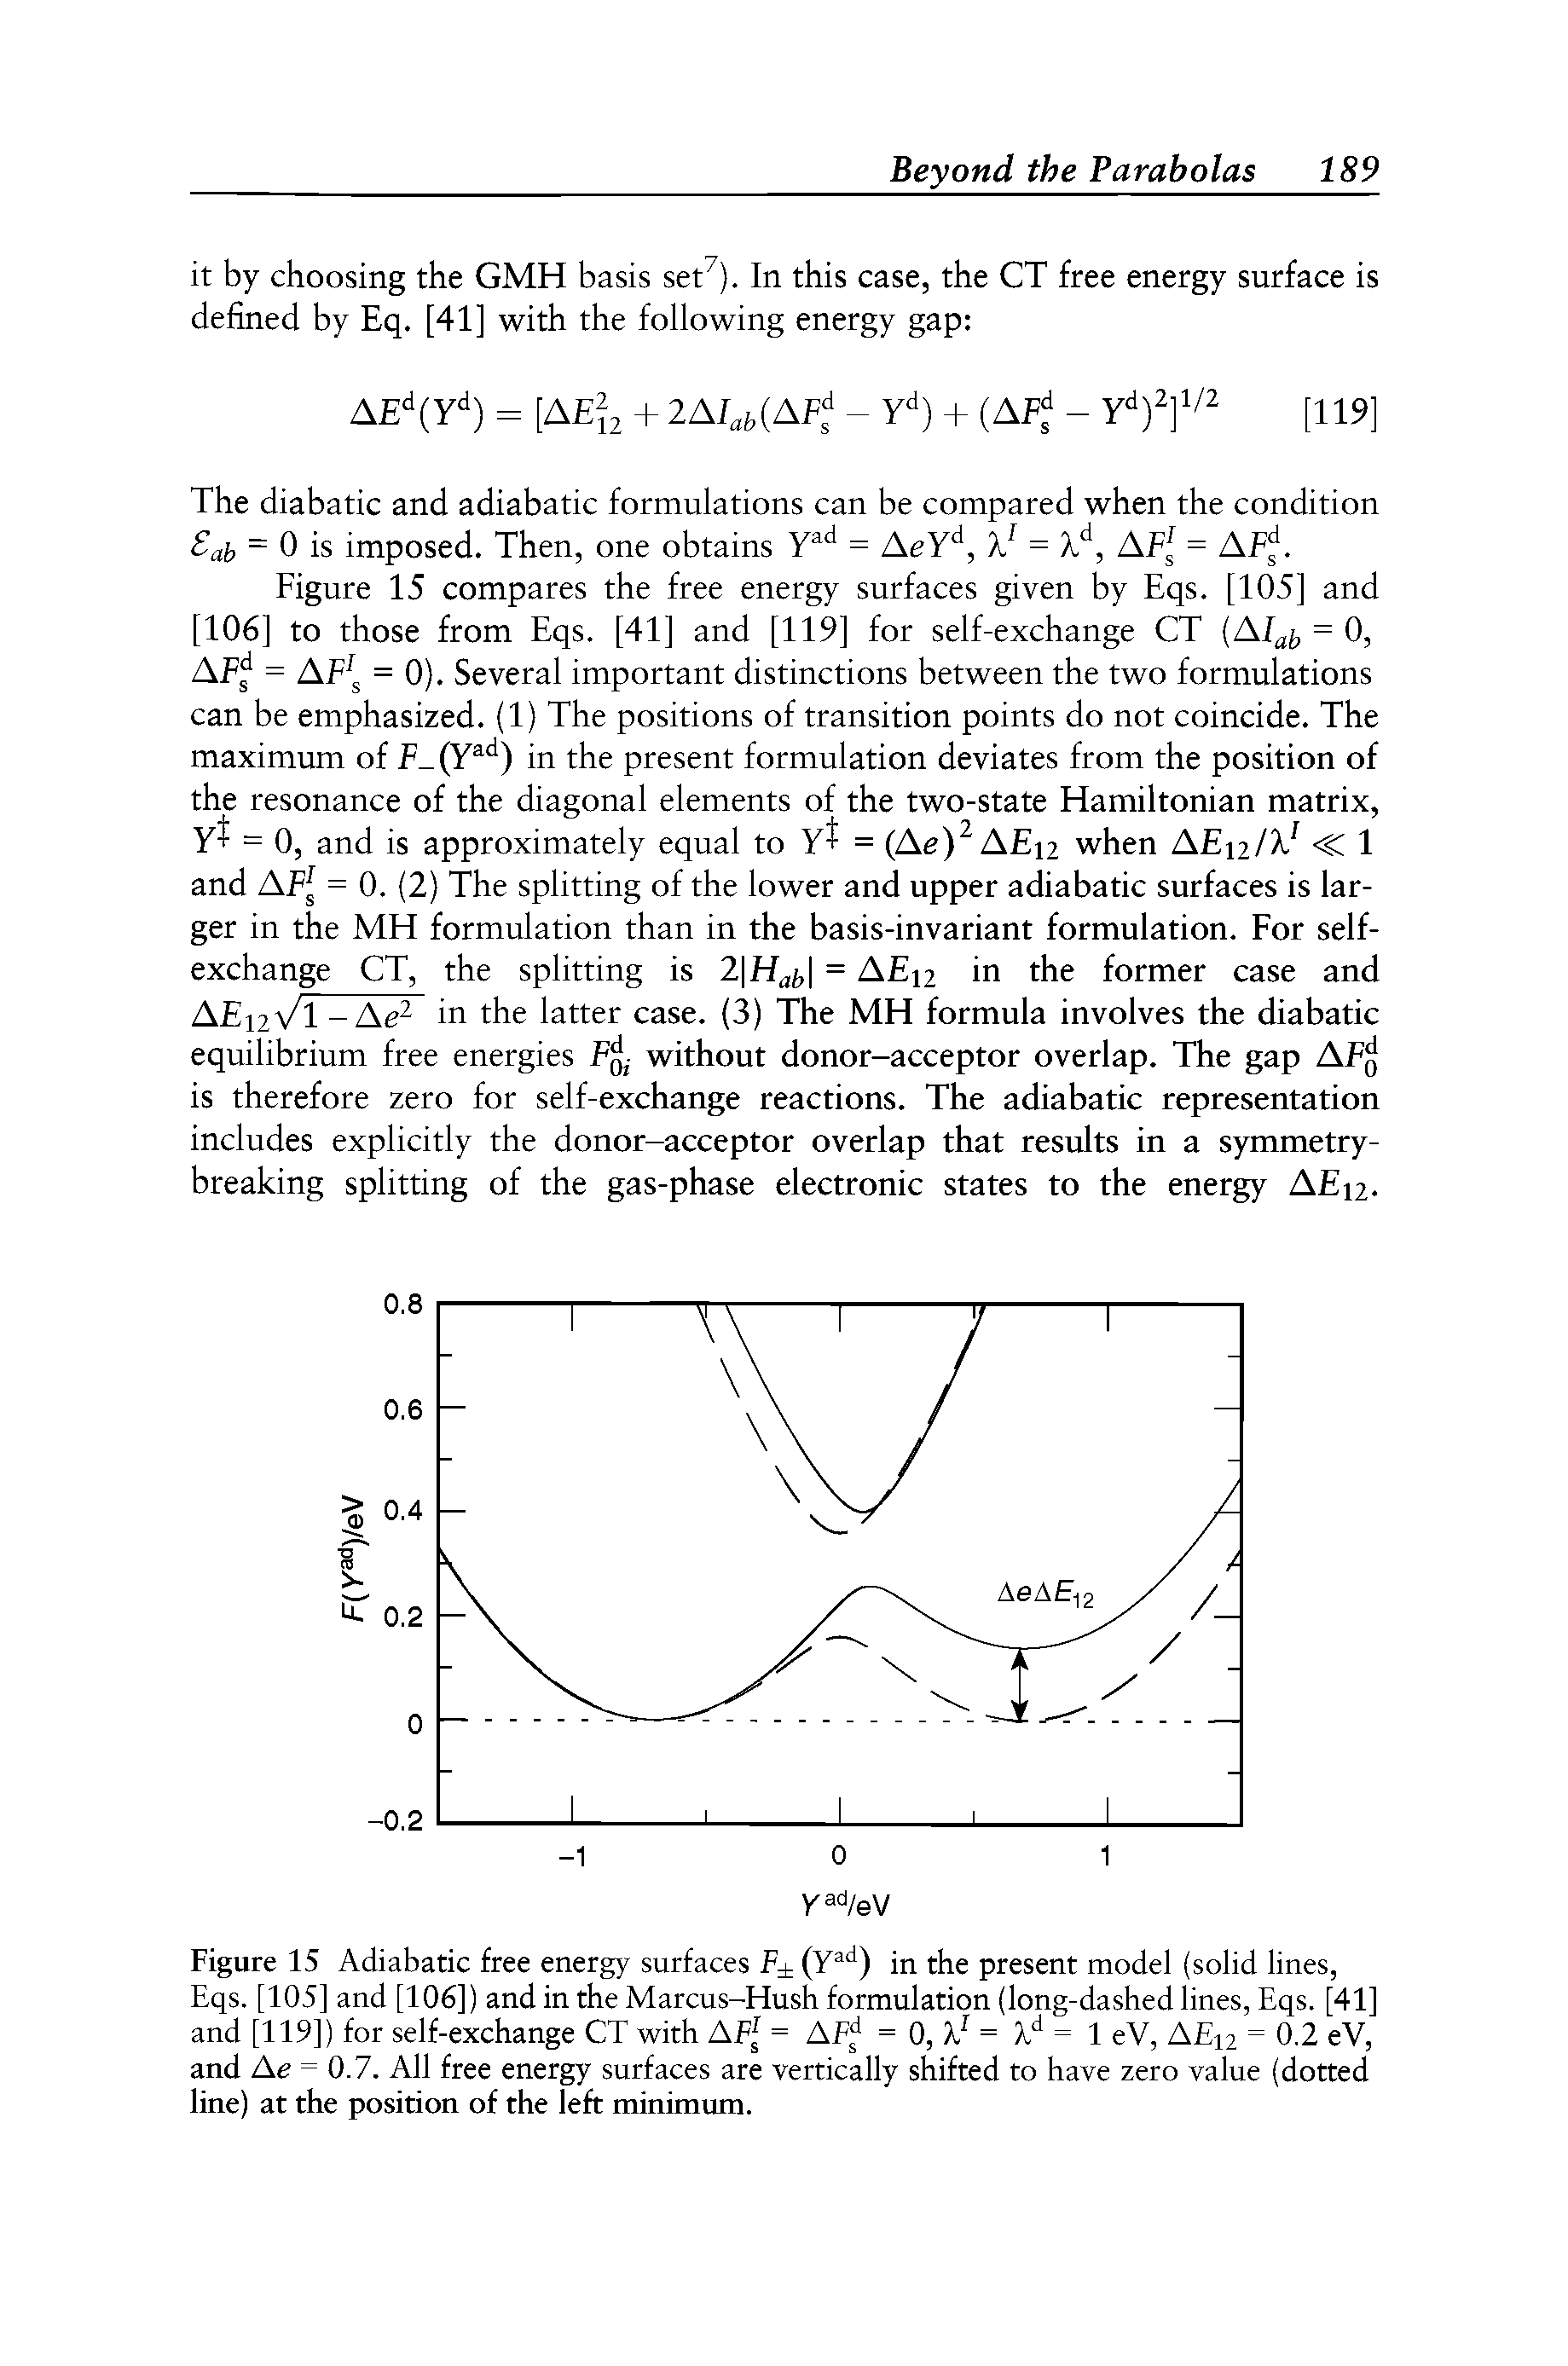 Figure 15 Adiabatic free energy surfaces F (Y ) in the present model (solid lines, Eqs. [105] and [106]) and in the Marcus-Hush formulation (long-dashed lines, Eqs. [41] and [119]) for self-exchange CT with AF = APf = 0, X = = 1 eV, AE12 = 0.2 eV,...